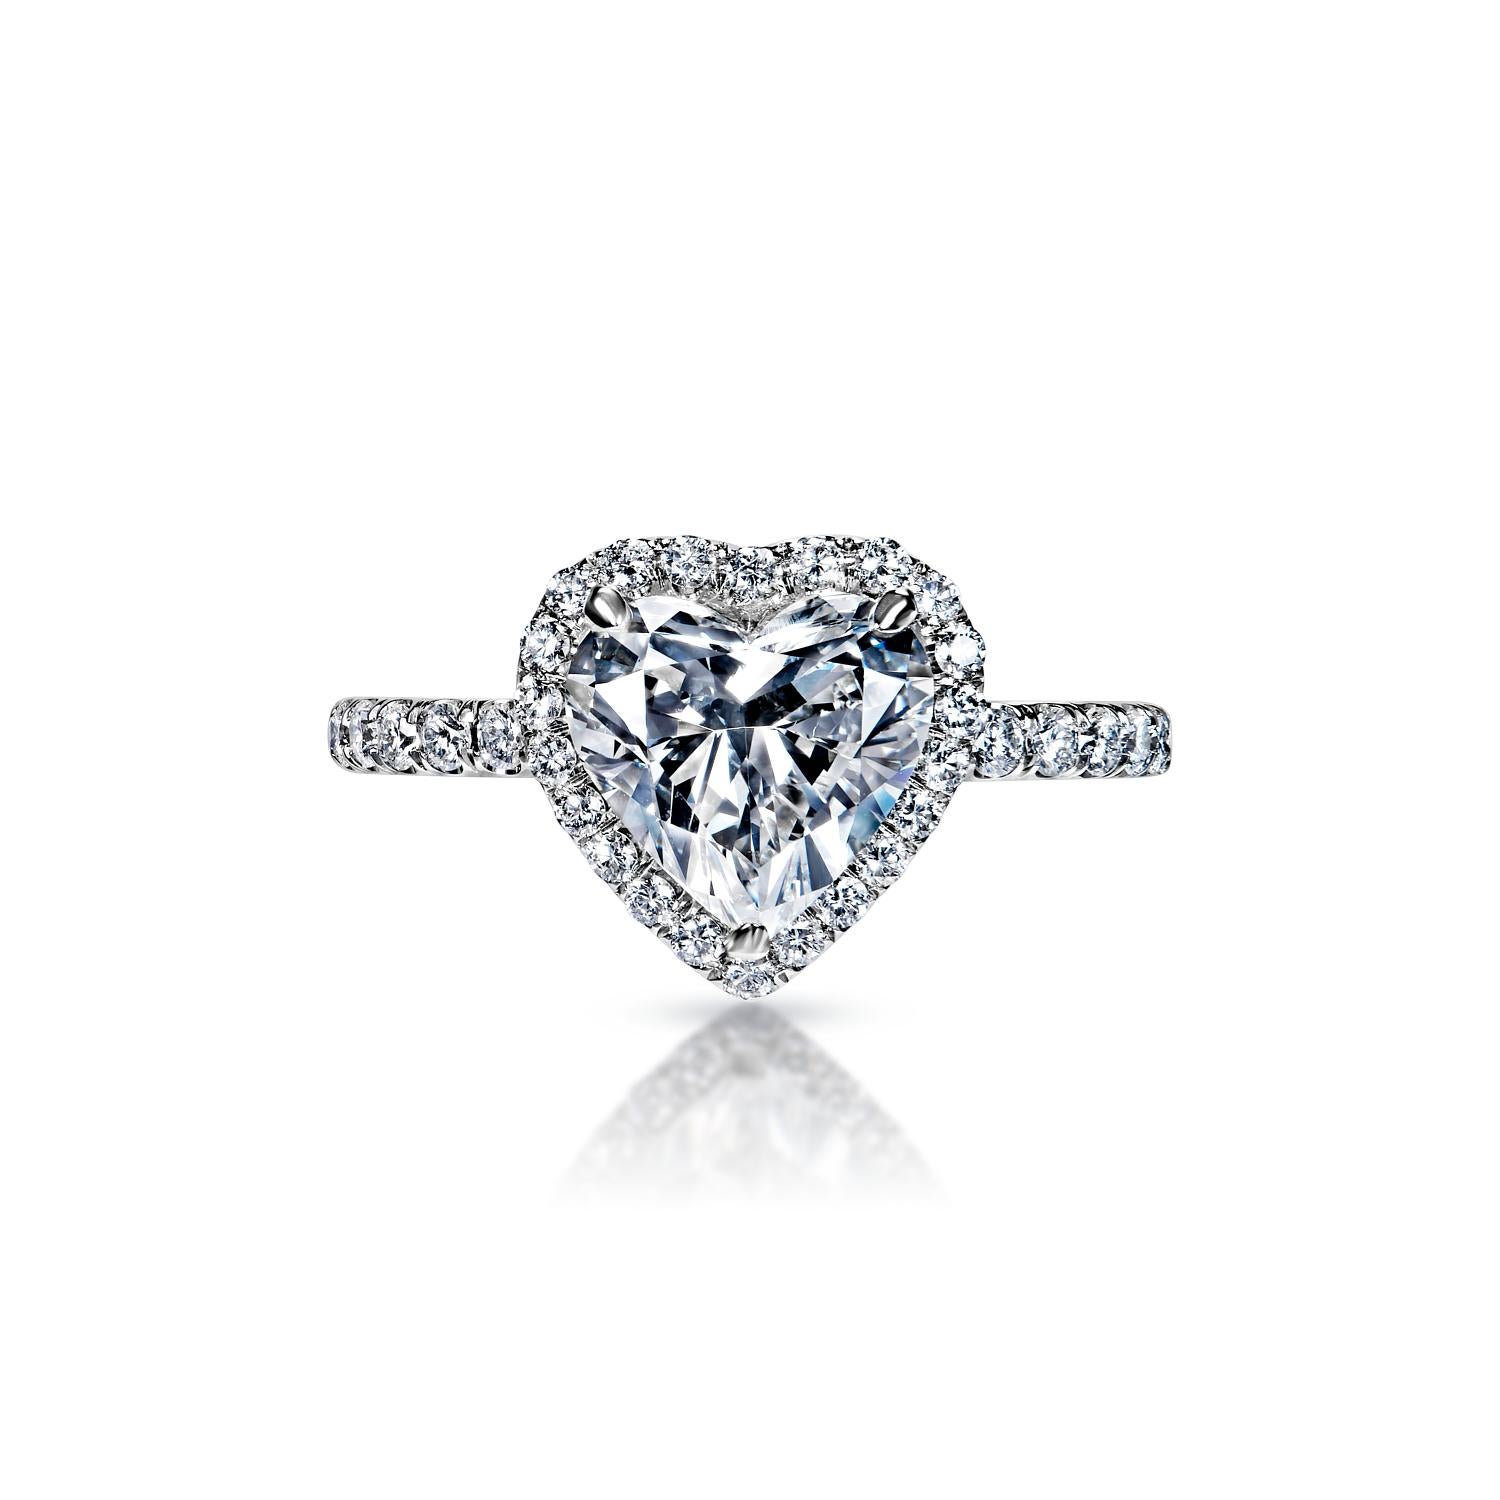 Yaretzi 3 Carat F SI2 Heart Shape Diamond Engagement Ring in Platinum. GIA Certified. By Mike Nekta

 

GIA CERTIFIED
Center Diamond:

Carat Weight: 2.01 Carats
Color : F*
Clarity: SI2
Style: Heart Shape
*This Diamond has been treated by one or more